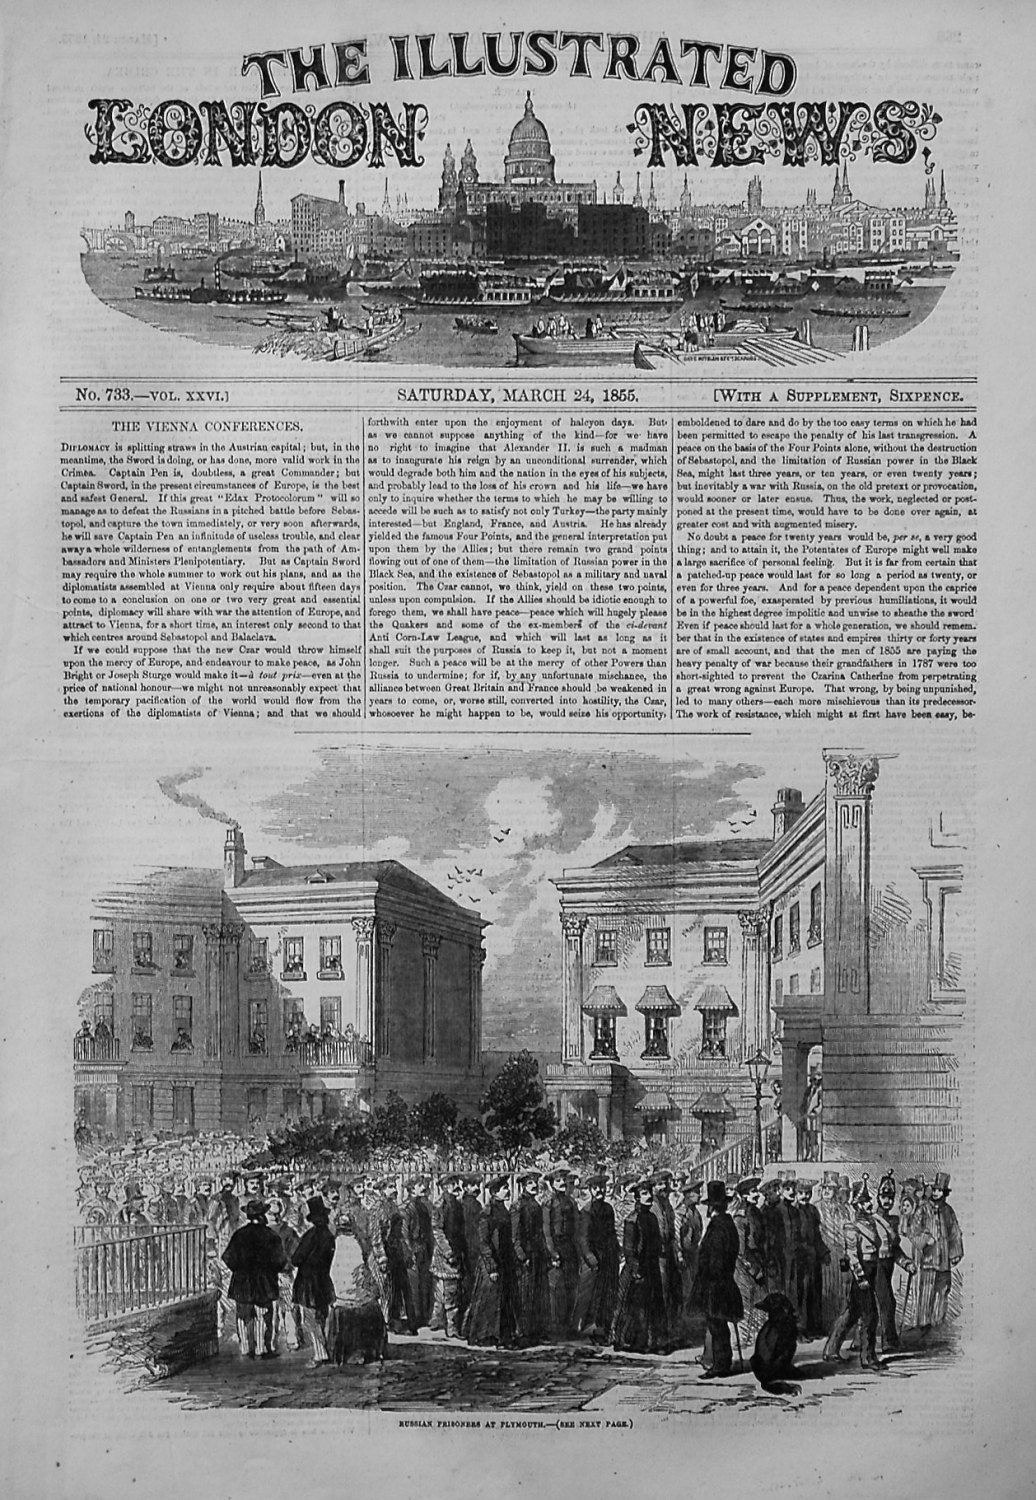 Illustrated London News March 24th 1855.